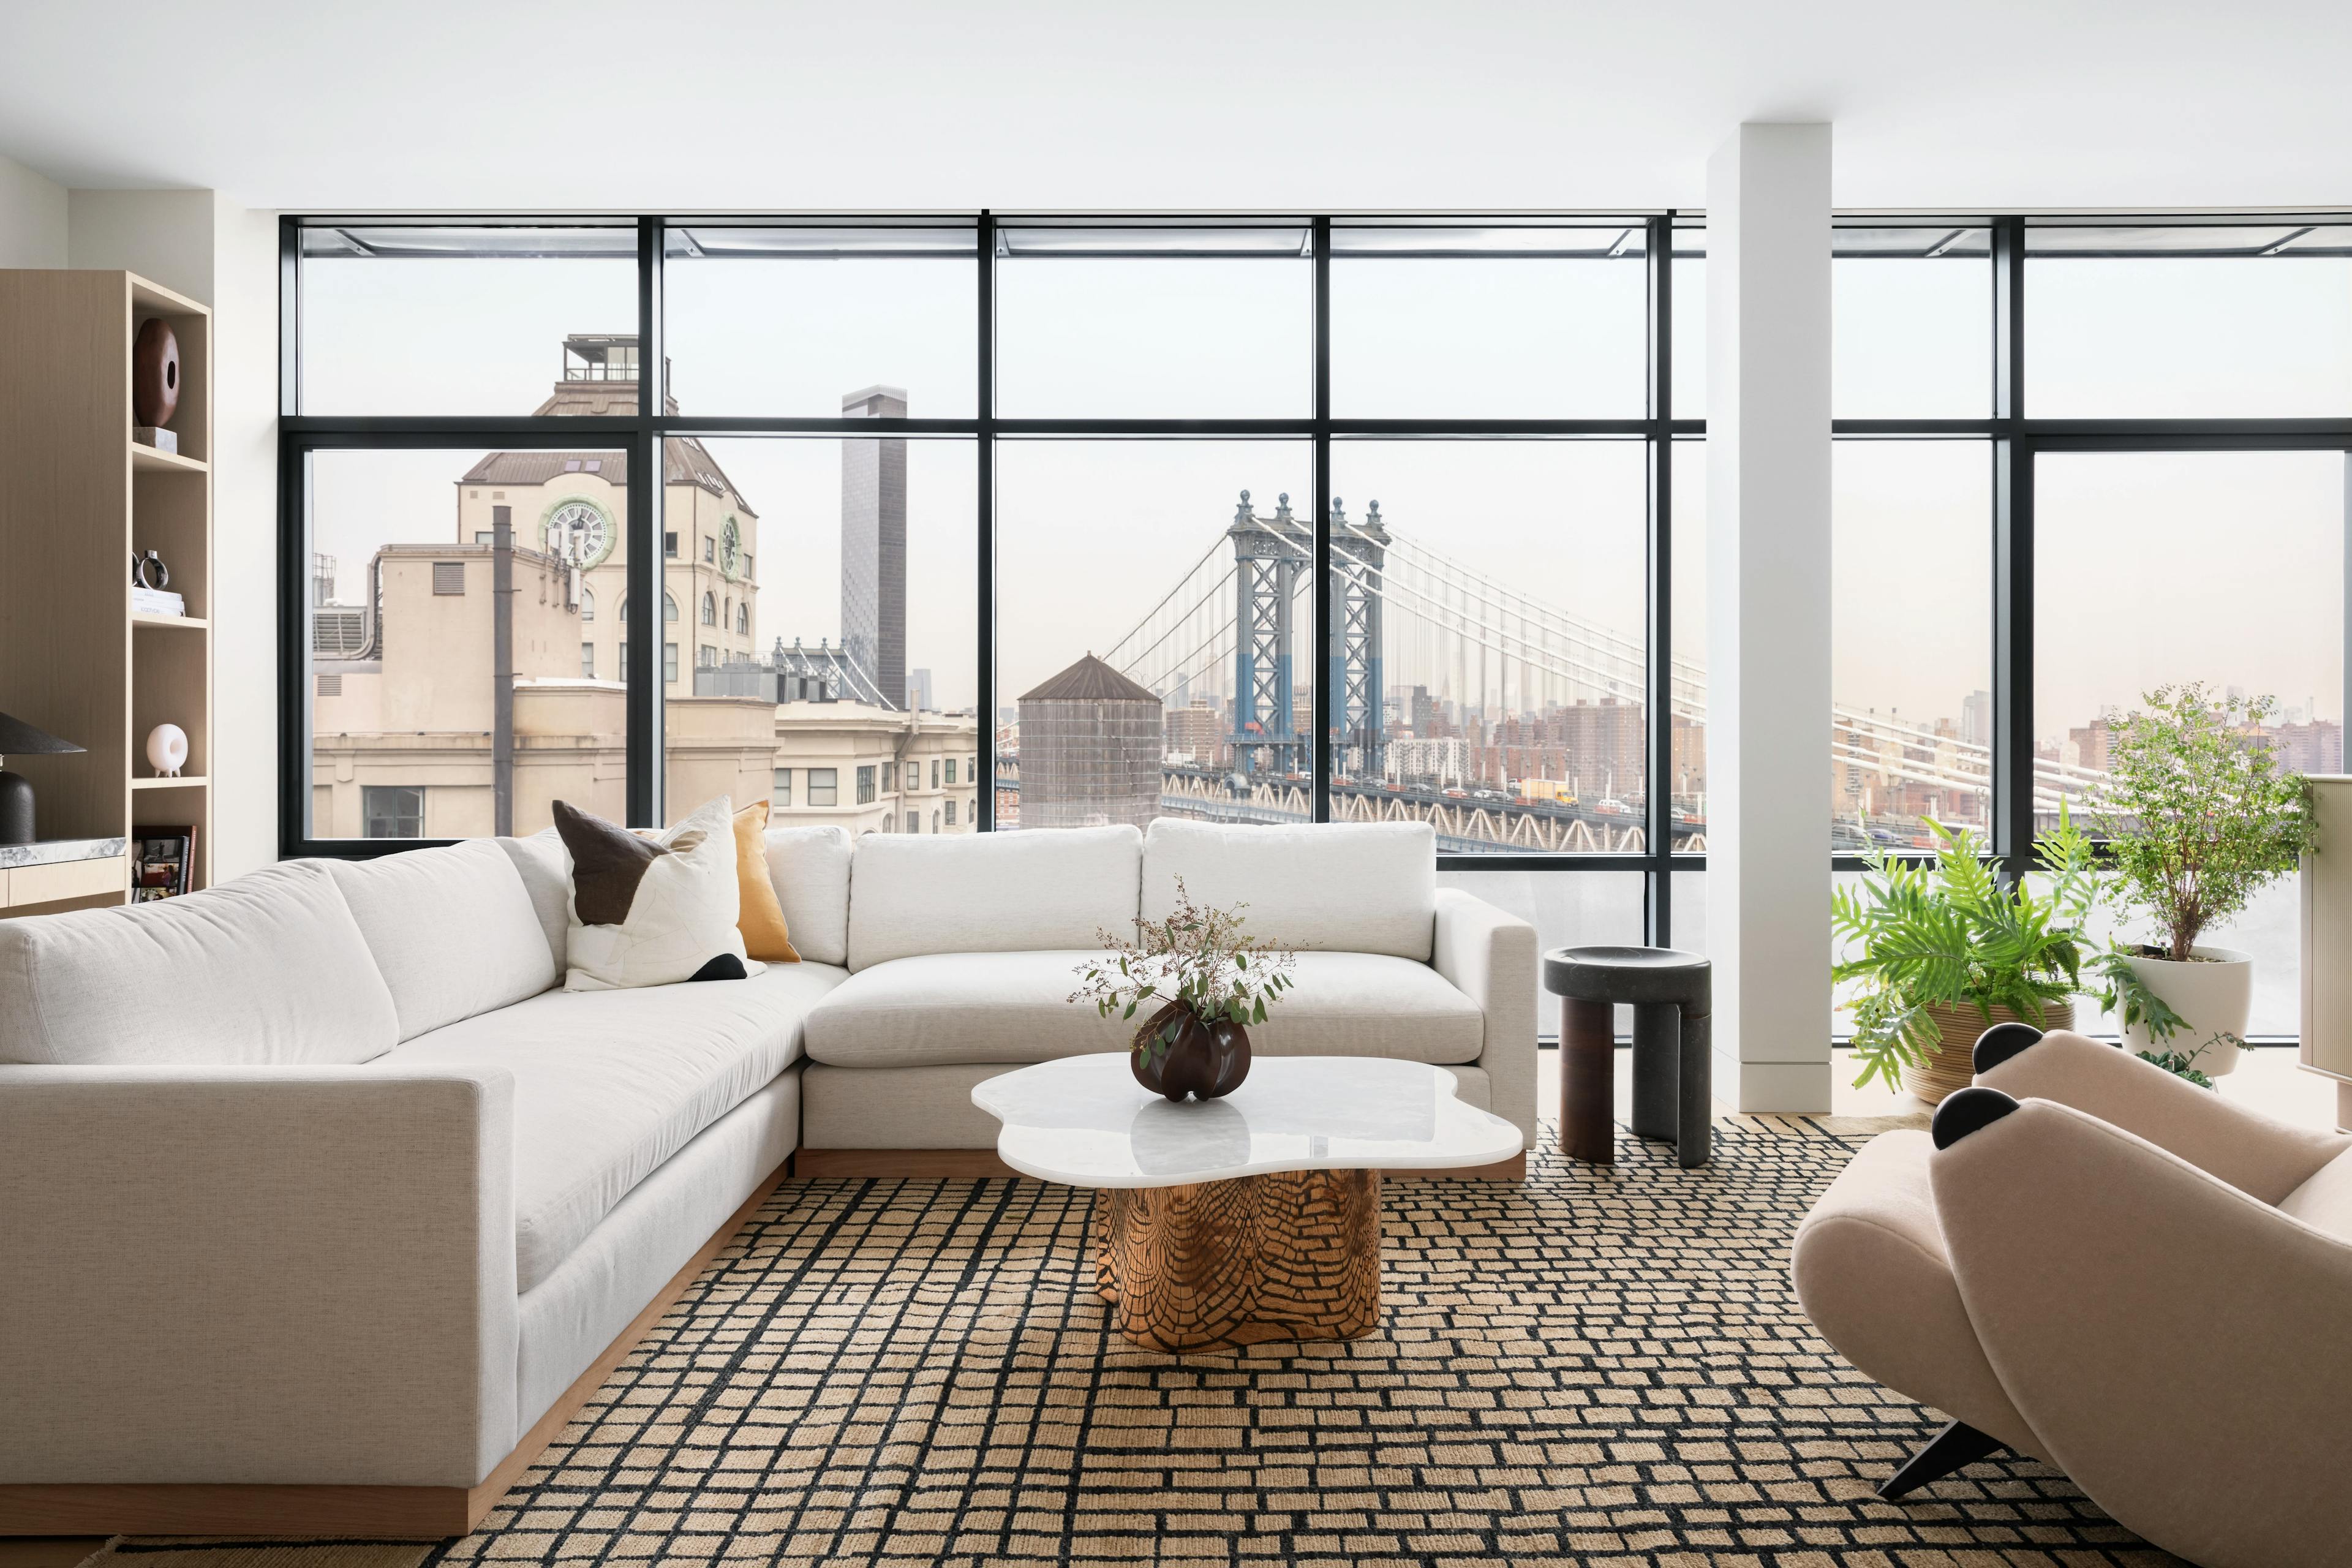 Modern living room with a white sectional sofa and floor-to-ceiling windows overlooking the Manhattan Bridge in the distance. 